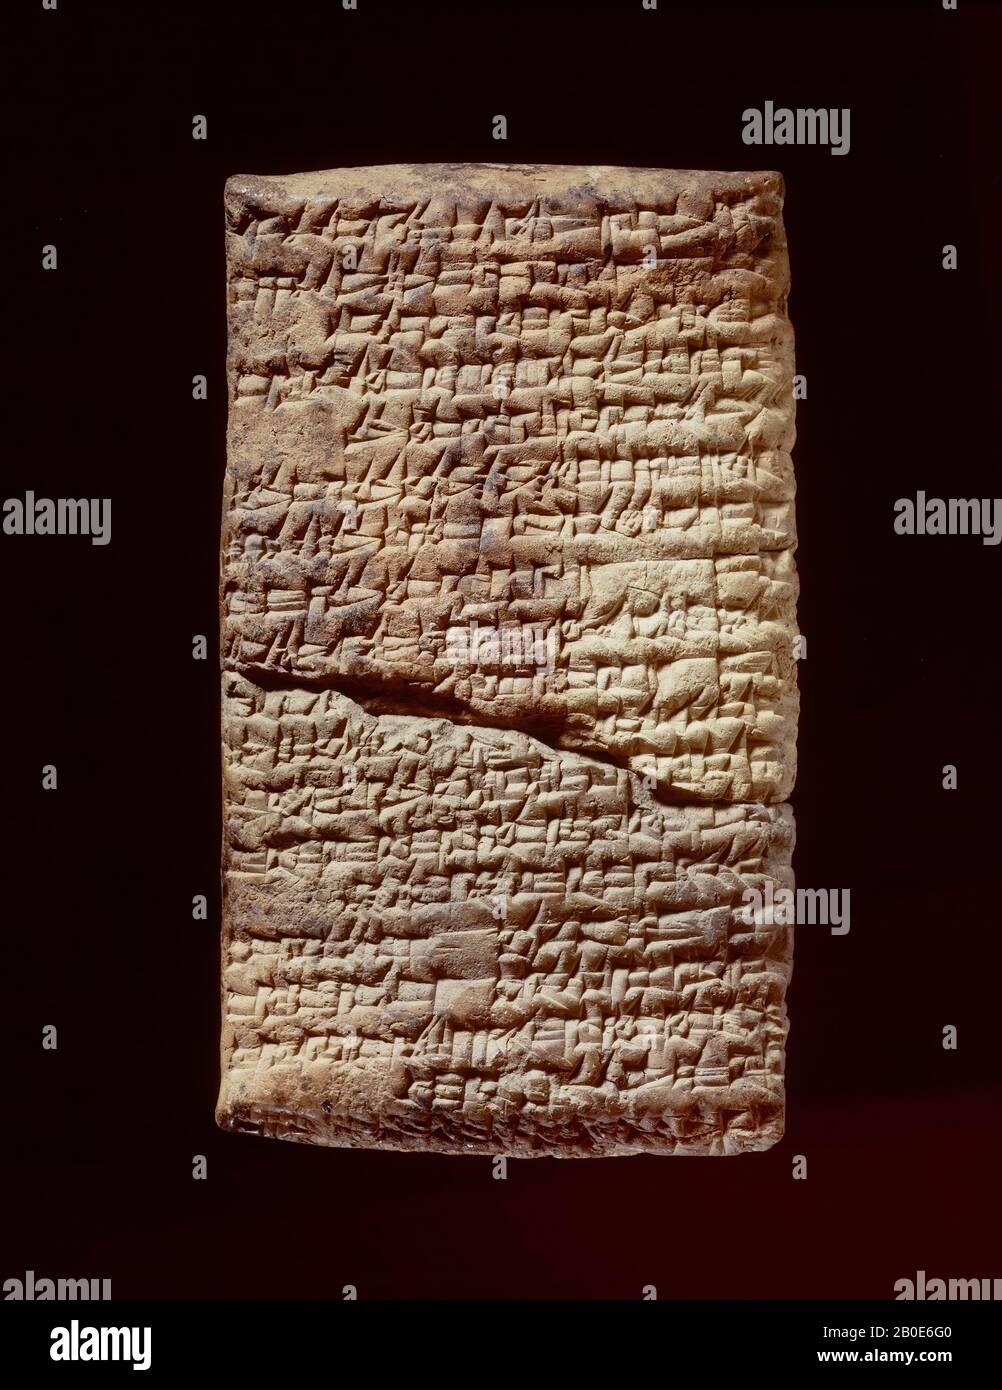 A clay tablet with a cuneiform inscription. It is the beginning of a hymn to King Hammurabi of Babylon (1792-1750 BC). In this Sumerian hymn, Hammurabi sings his own praise. He praises himself as a mighty warrior, good governor and just judge: the dragon of kings, who thwarts their counsels, the net that is spread over the enemy .... who plunges the land that does not bend for Marduk with his strong weapon. ... I have expelled the enemies, wiped out the evil, set down (the population of) my land in grassy meadows, do not leave anyone who is startled by them. These last lines come almost Stock Photo